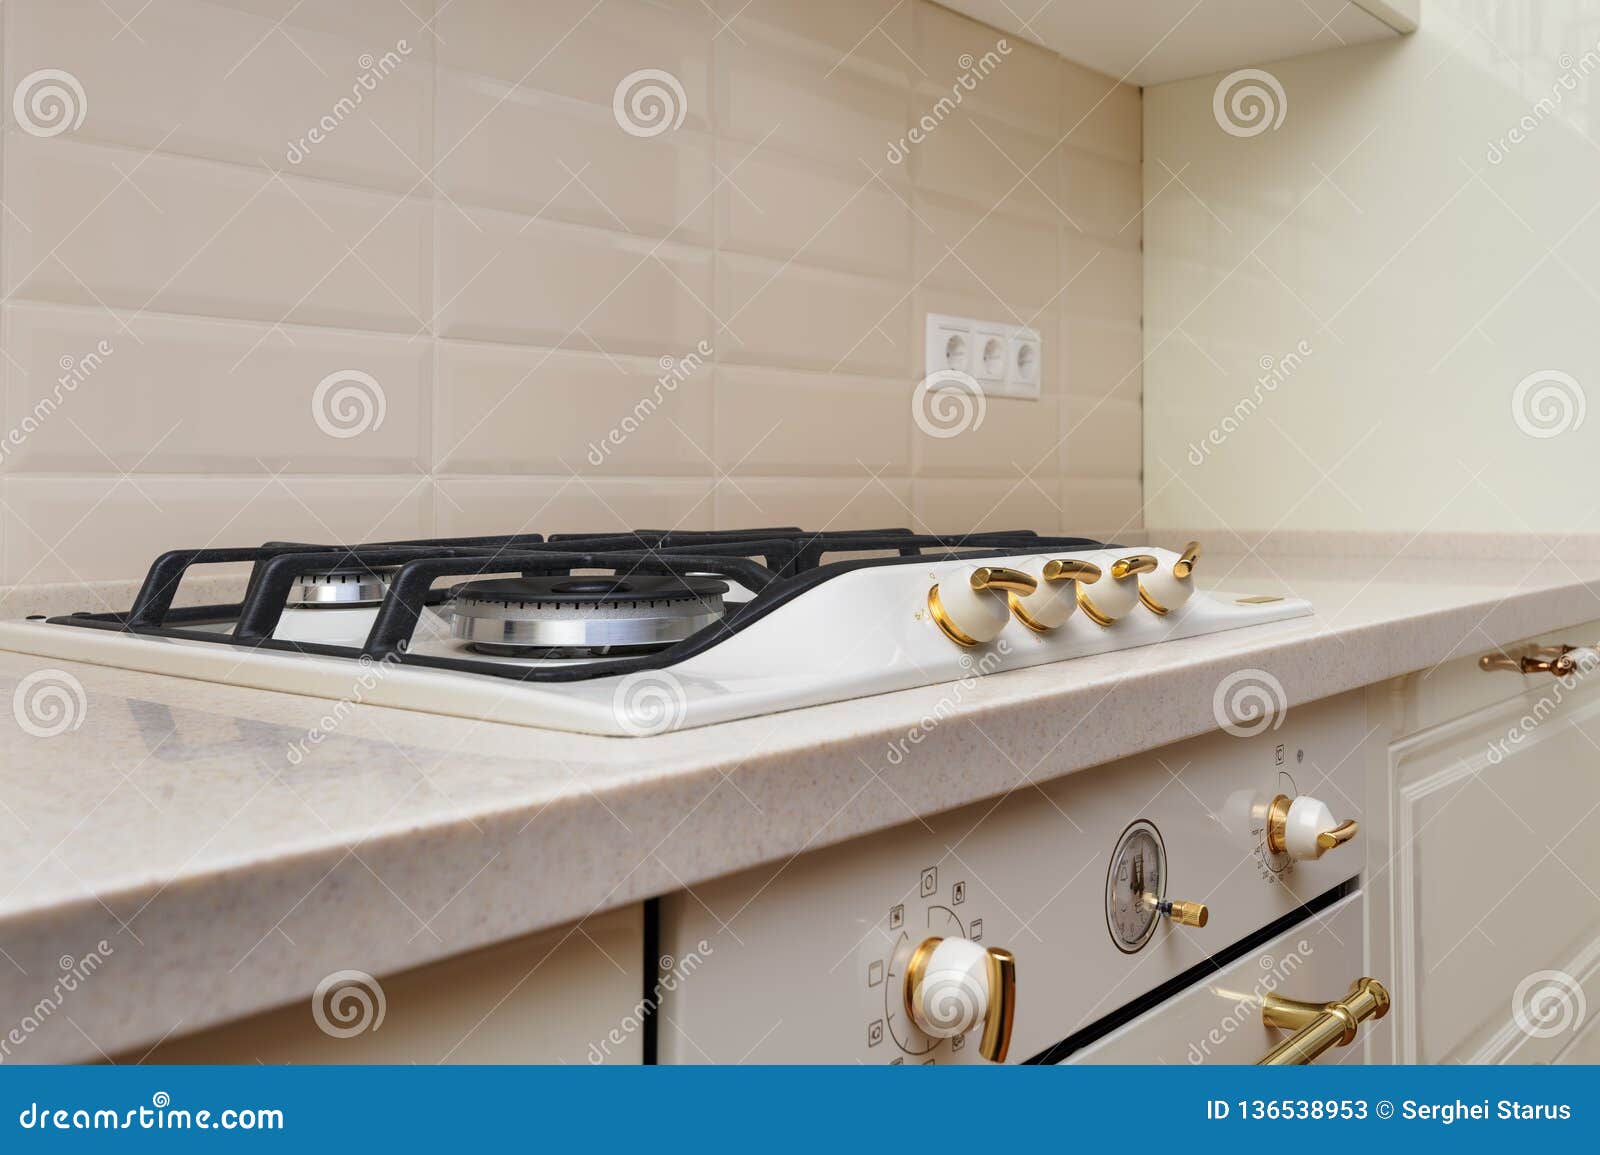 Gas Stove And Oven At Cream Colored Kitchen Stock Image Image Of